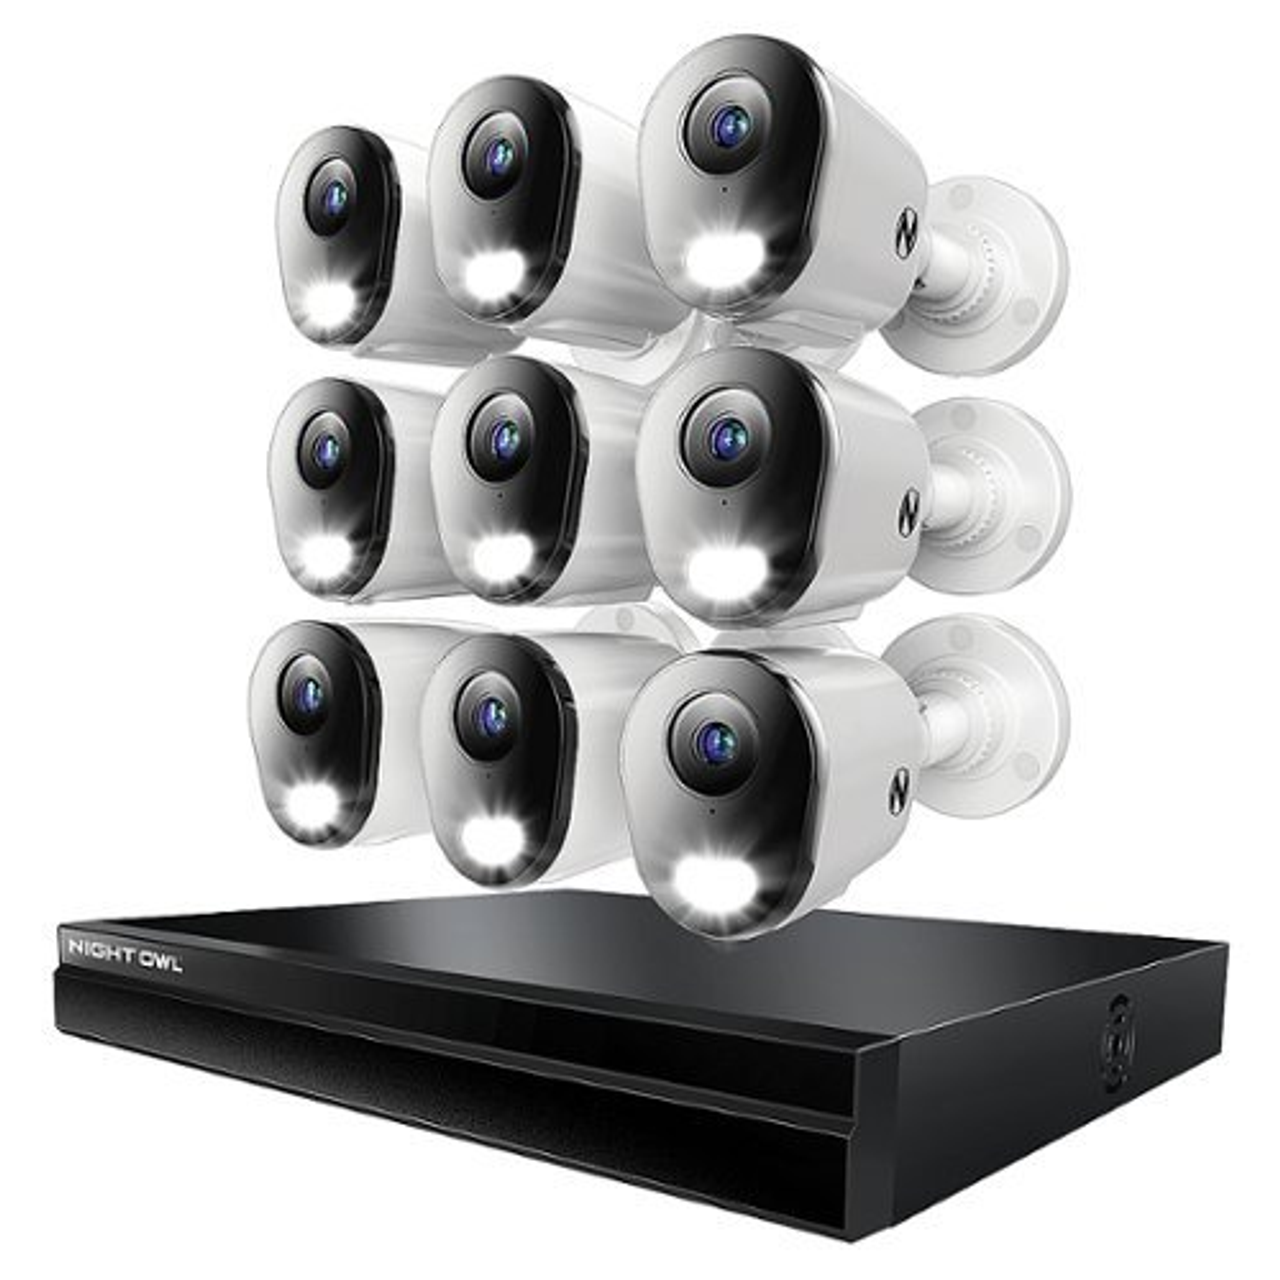 Night Owl - 24 Channel 9 Camera Indoor/Outdoor Wired IP 4K 4TB NVR Security System with 2-way Audio - Black/White